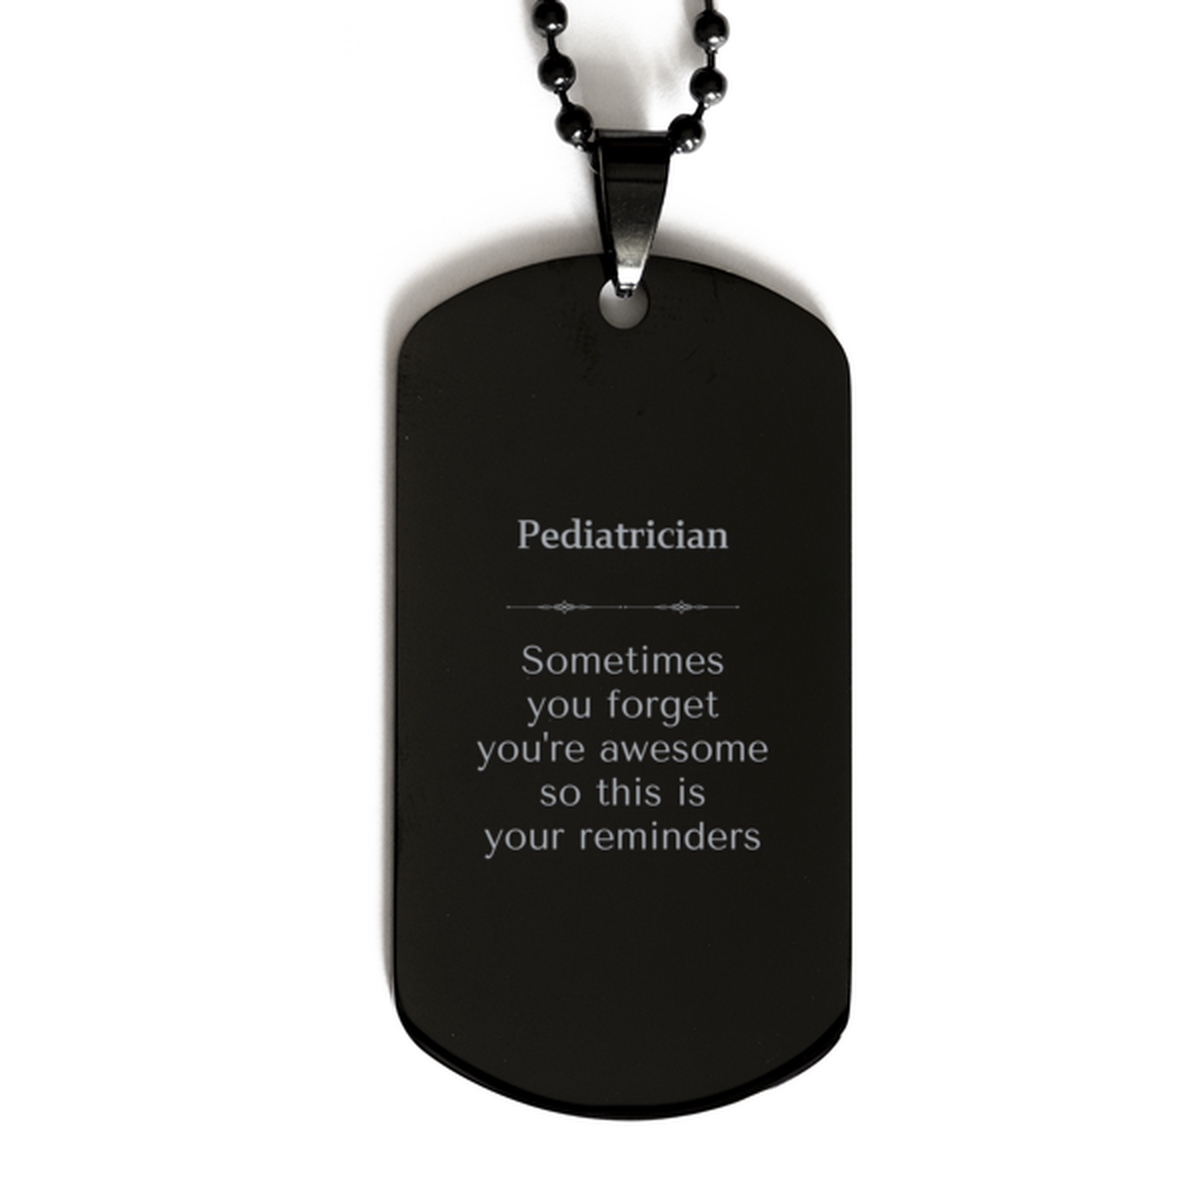 Sentimental Pediatrician Black Dog Tag, Pediatrician Sometimes you forget you're awesome so this is your reminders, Graduation Christmas Birthday Gifts for Pediatrician, Men, Women, Coworkers